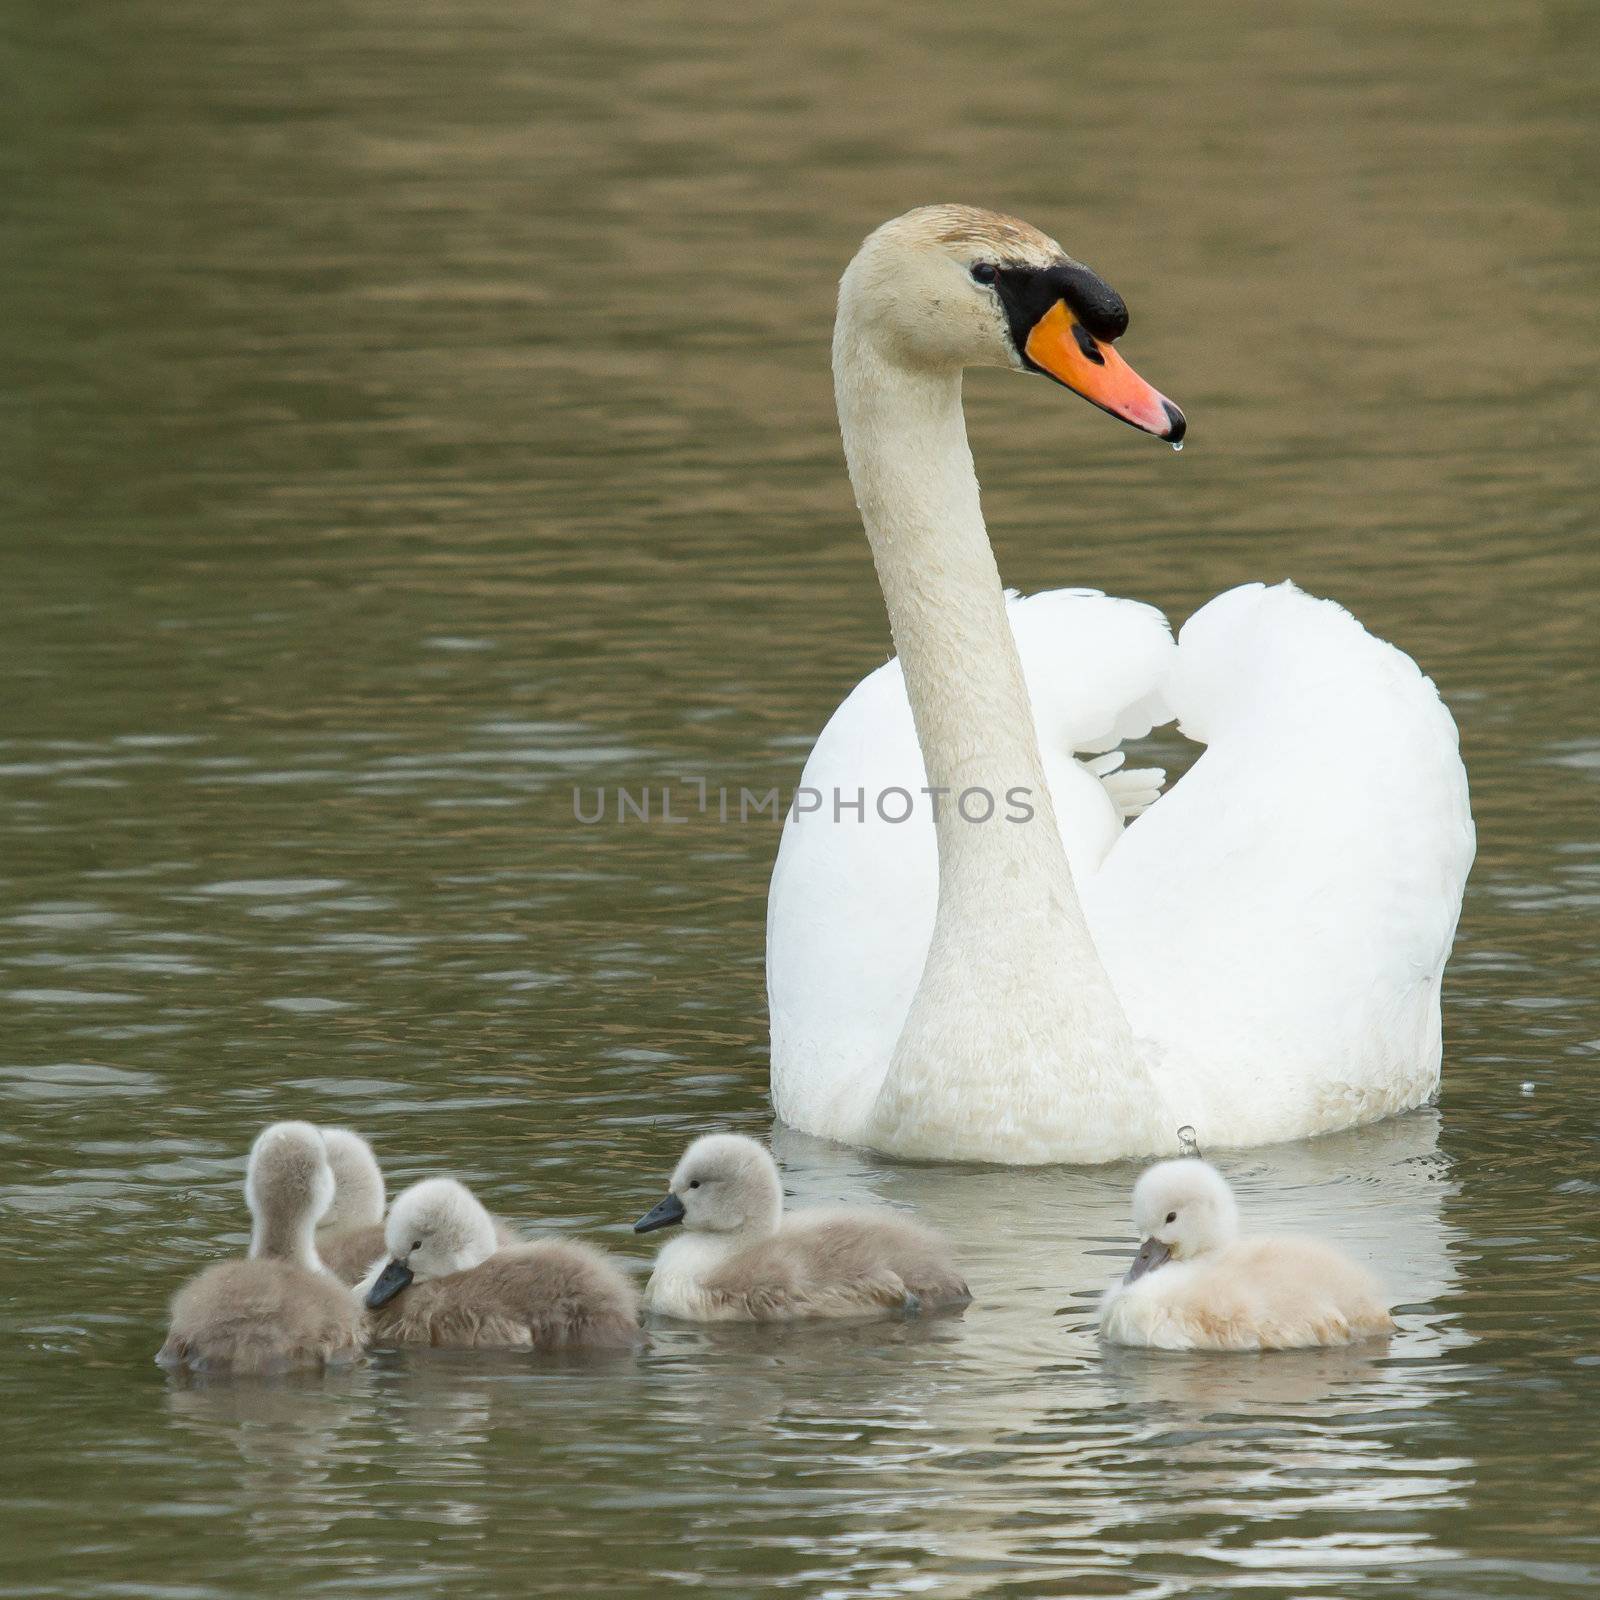 Cygnets are swimming in the water by michaklootwijk